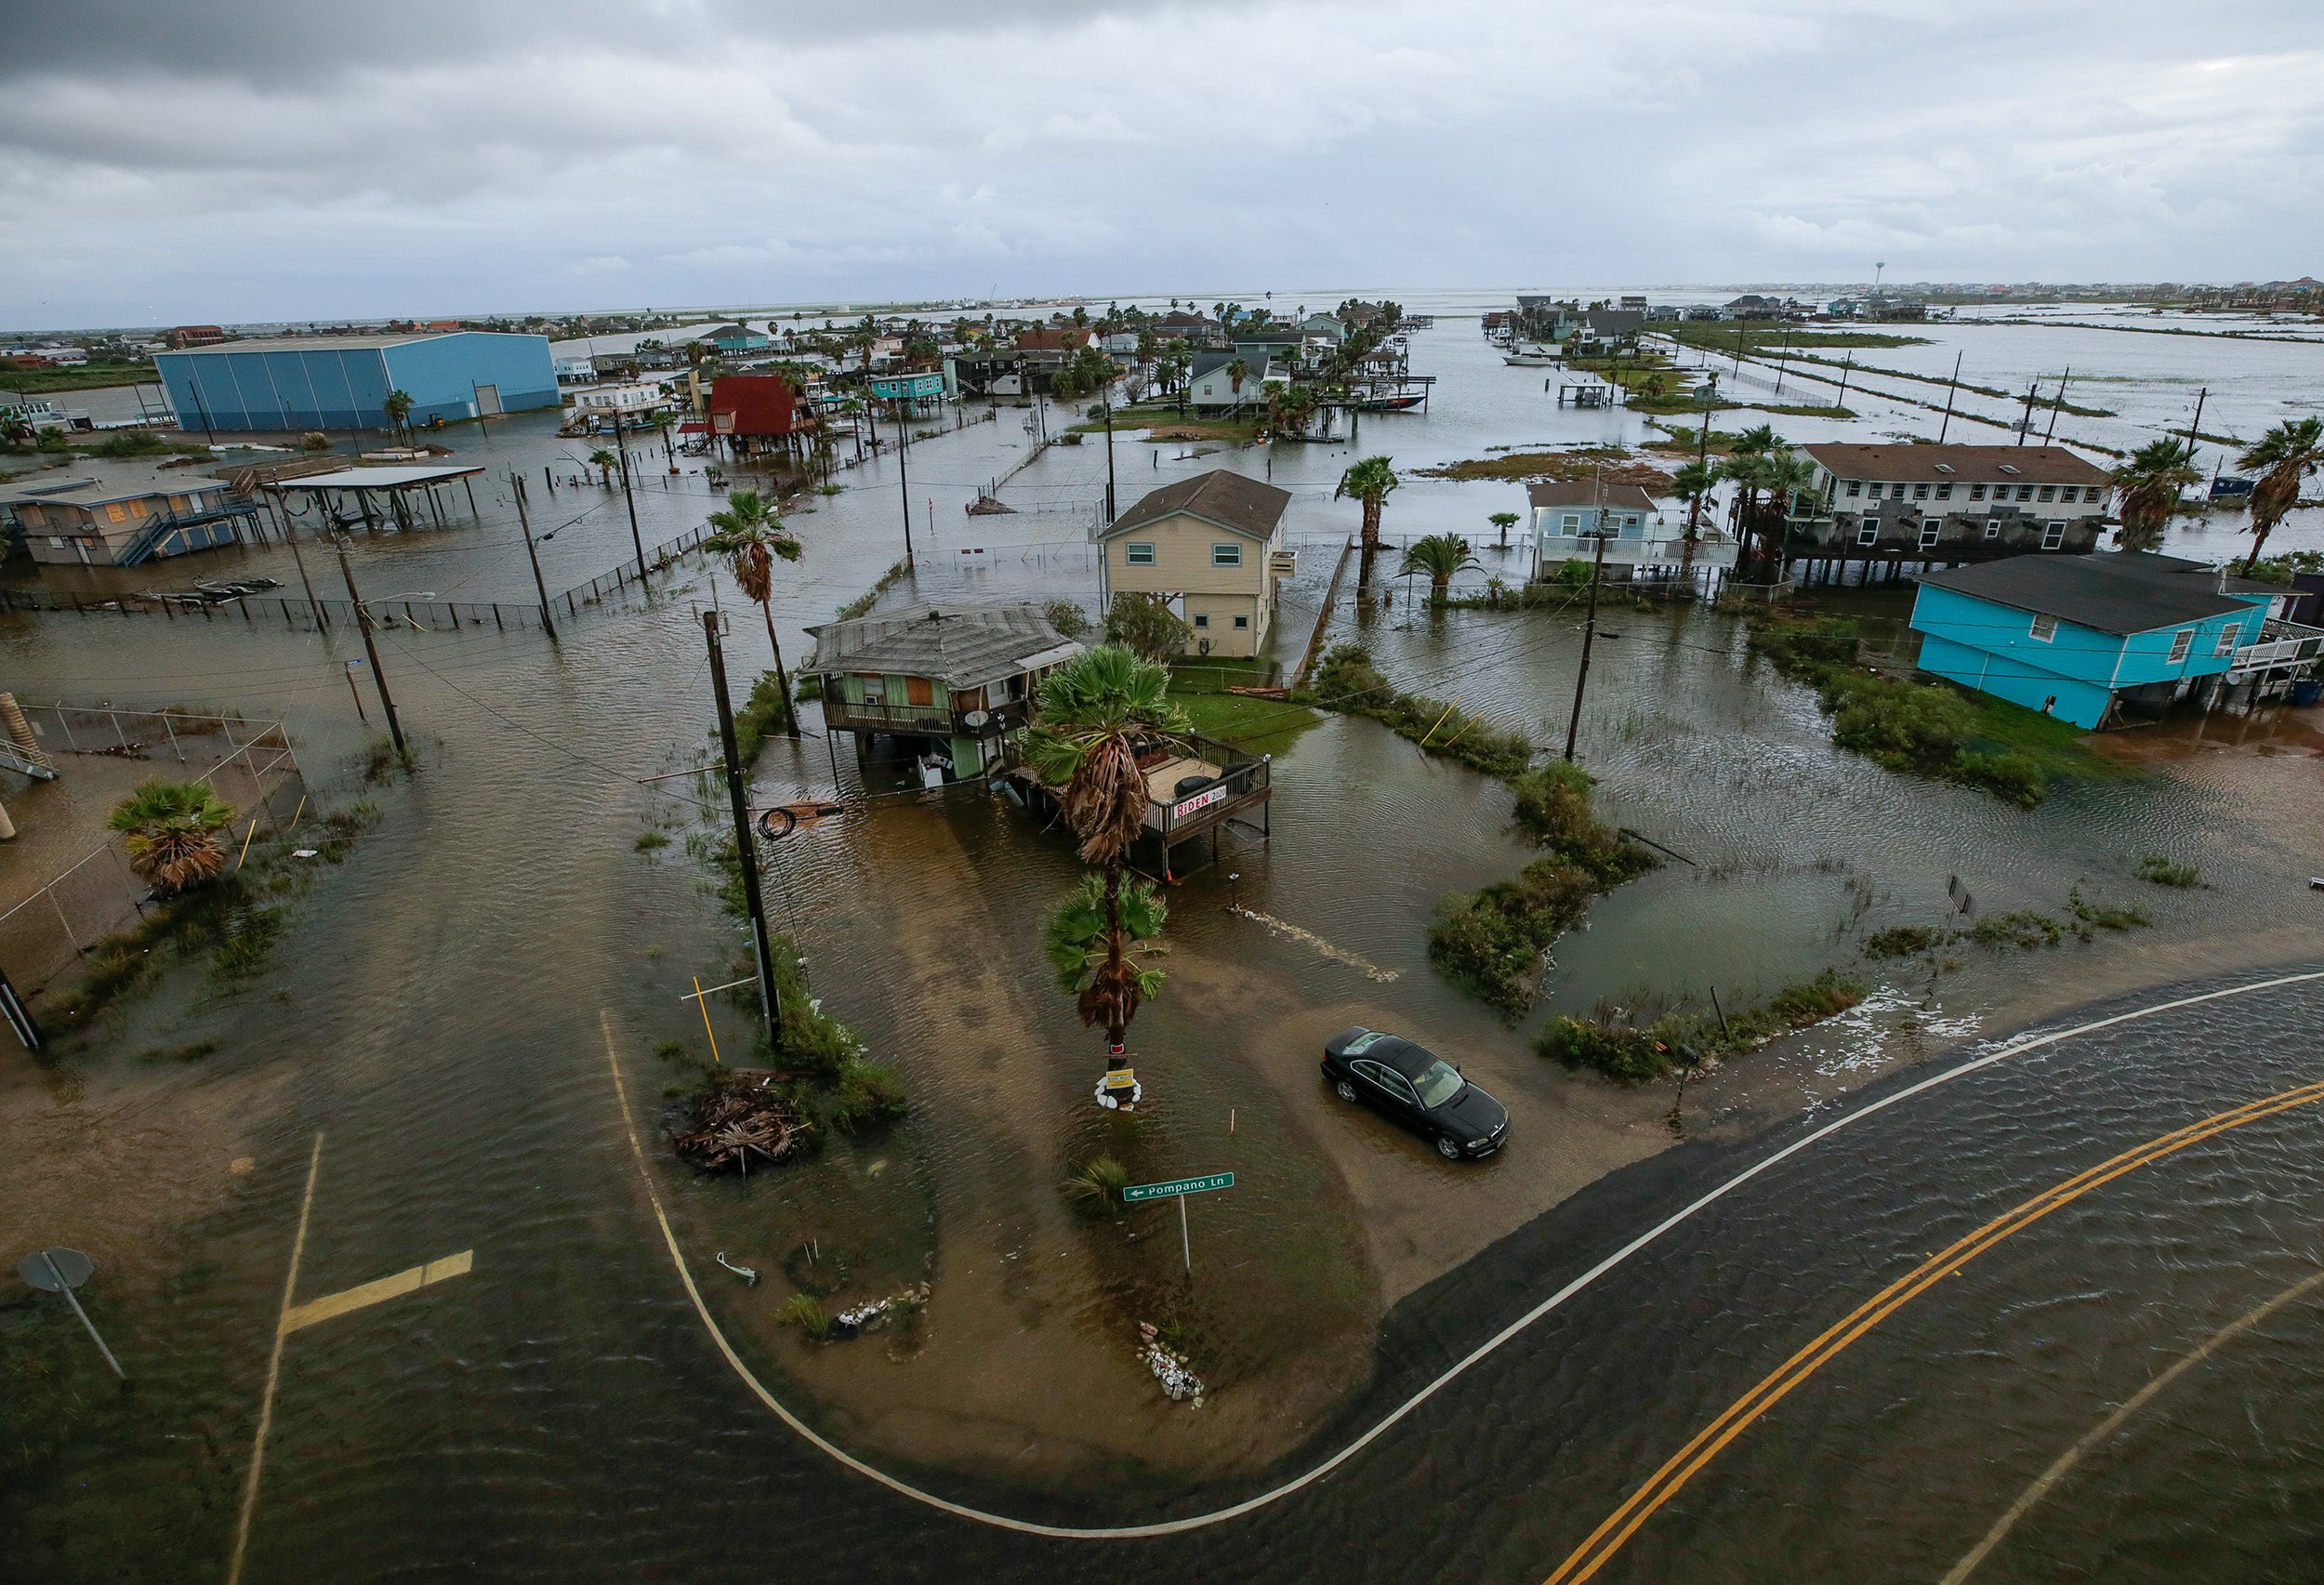  Roads remain flooded after Tropical Storm Beta made landfall overnight, on Tuesday, Sept. 22, 2020, in Surfside Beach, Texas. 